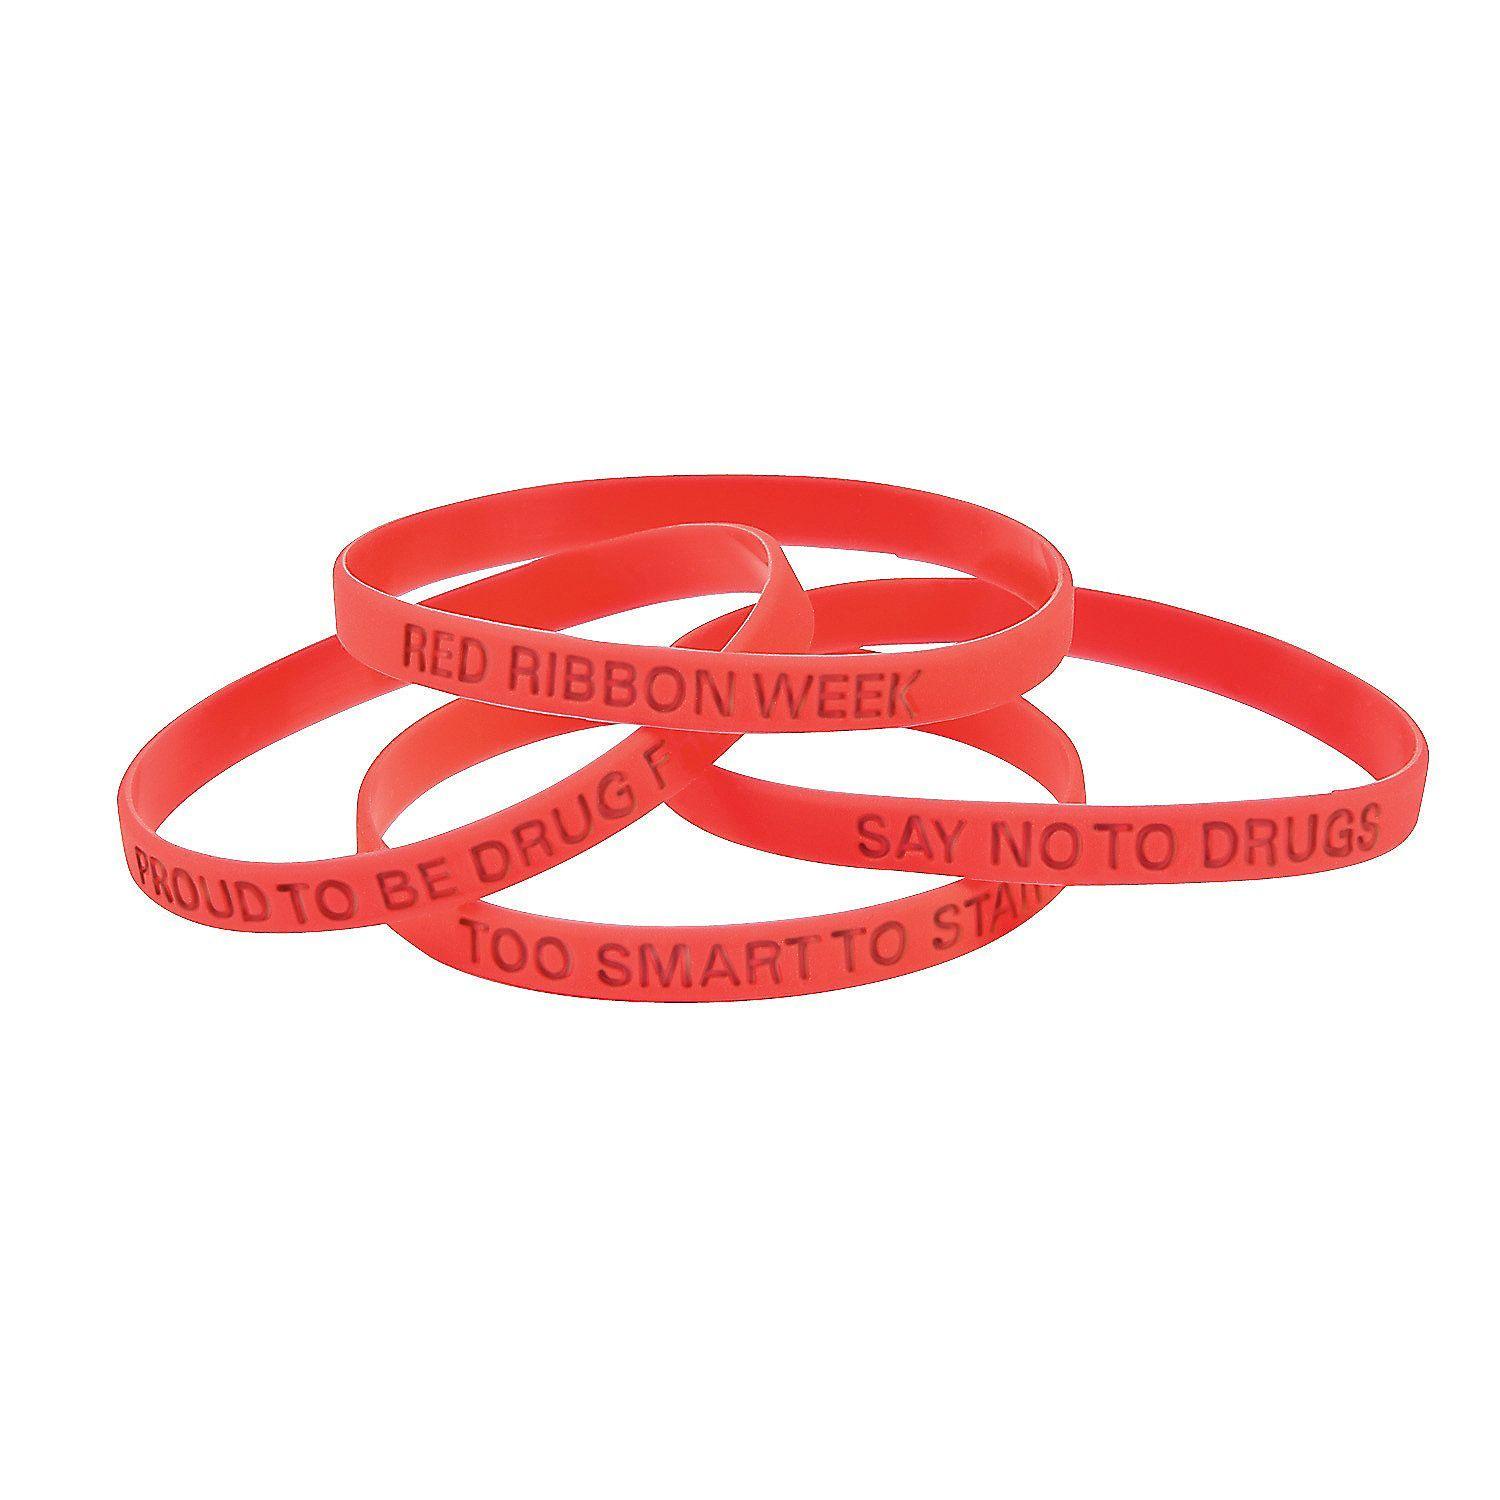 Blue Orange Red Ribbon Logo - Red Awareness Ribbon Thin Silicone Bands.com. Red